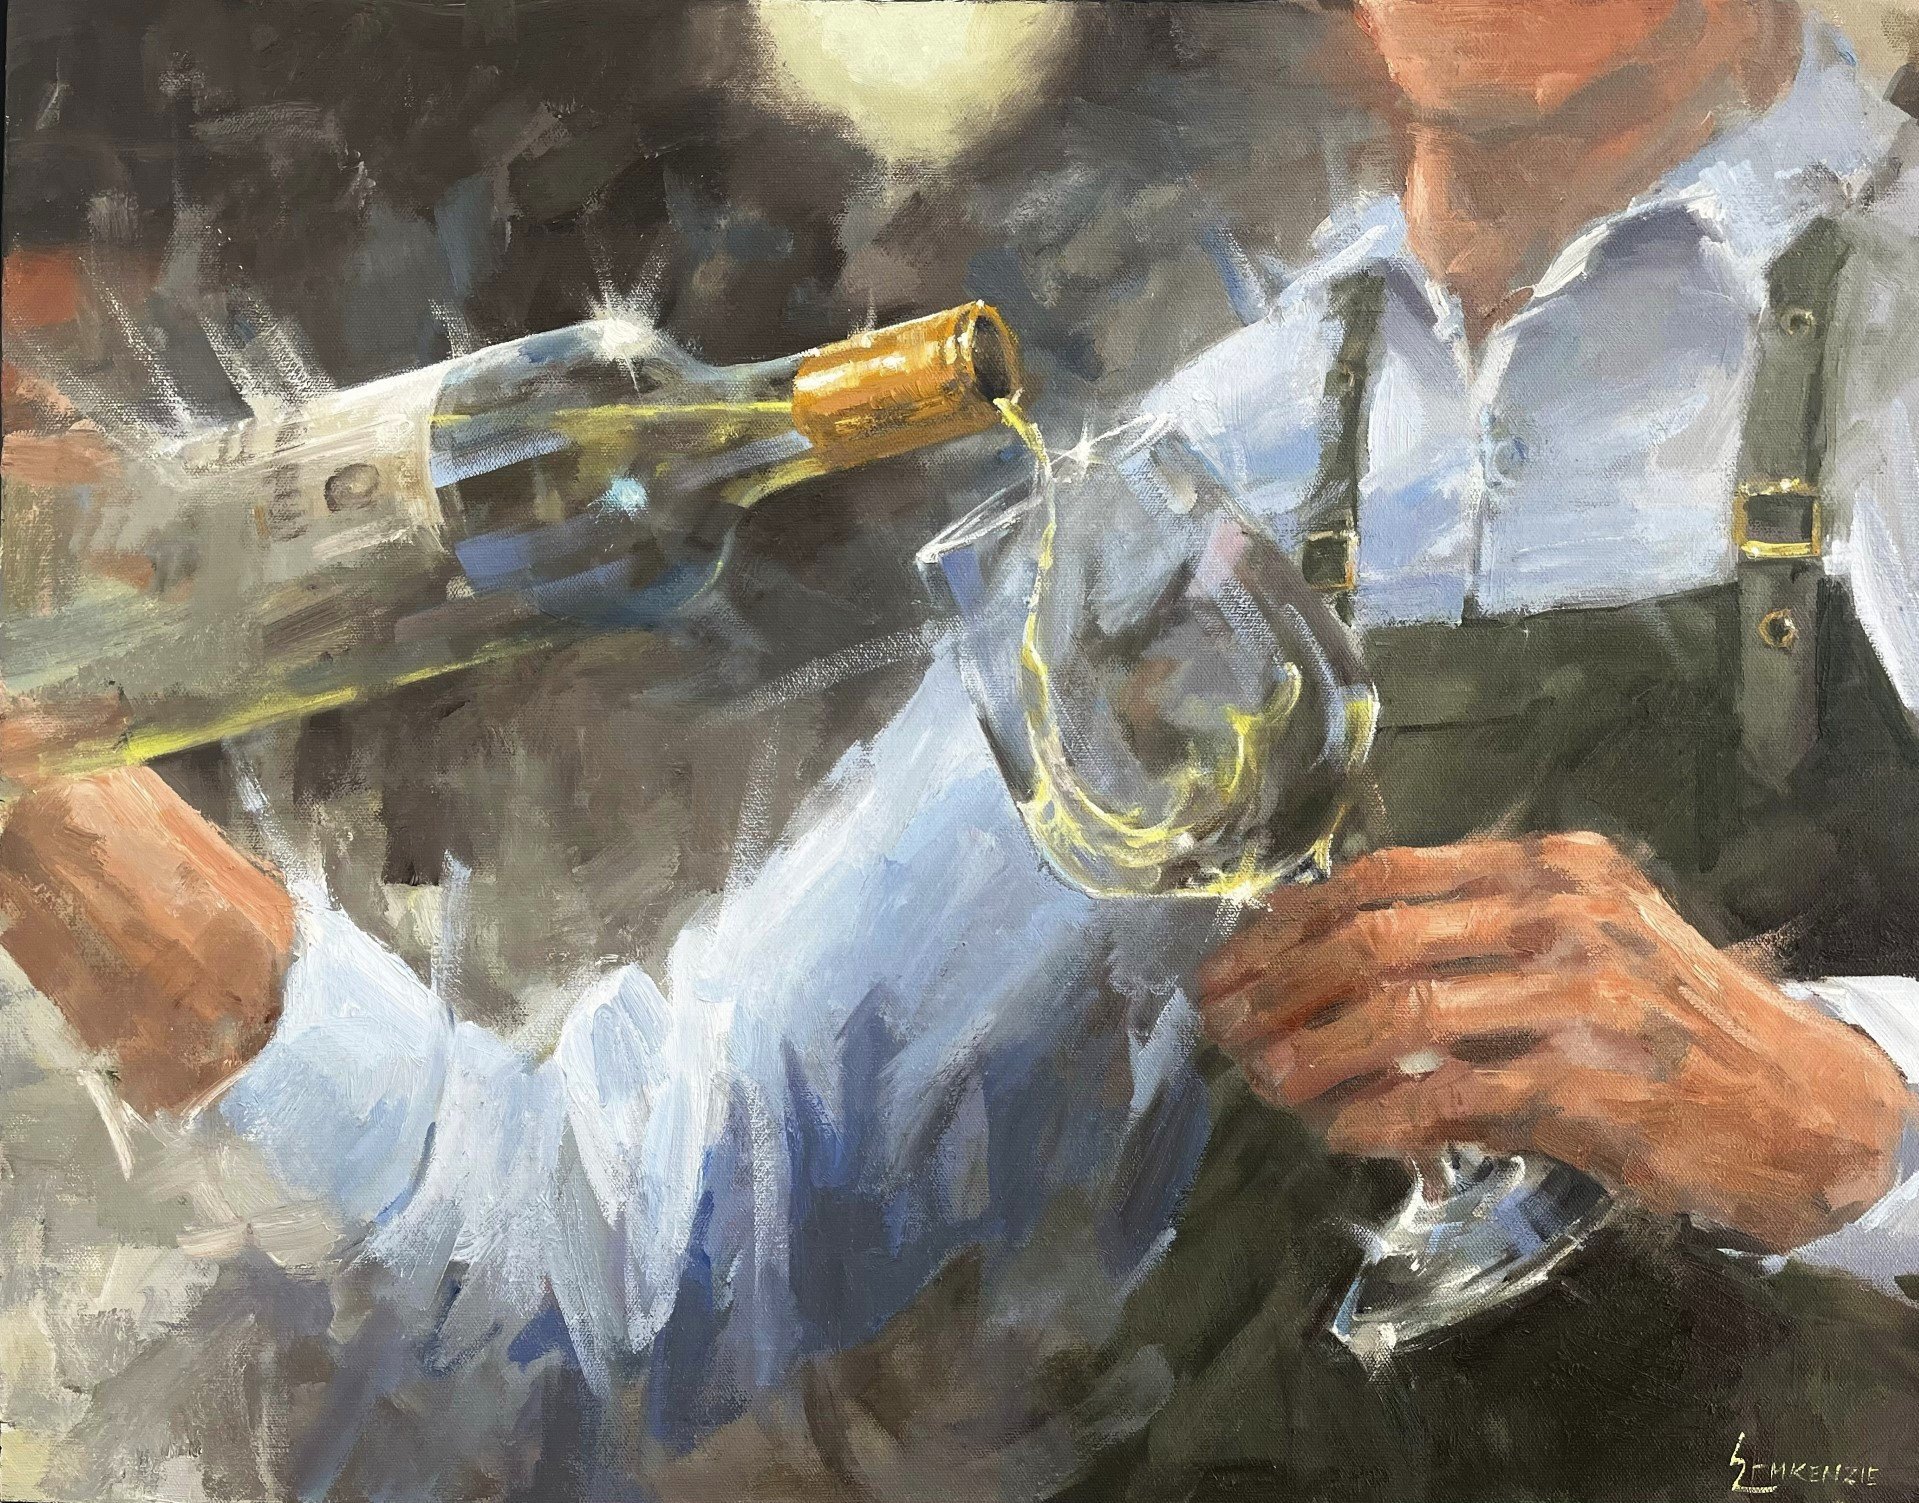  “Sommeliers White” 22x28, $2700. 